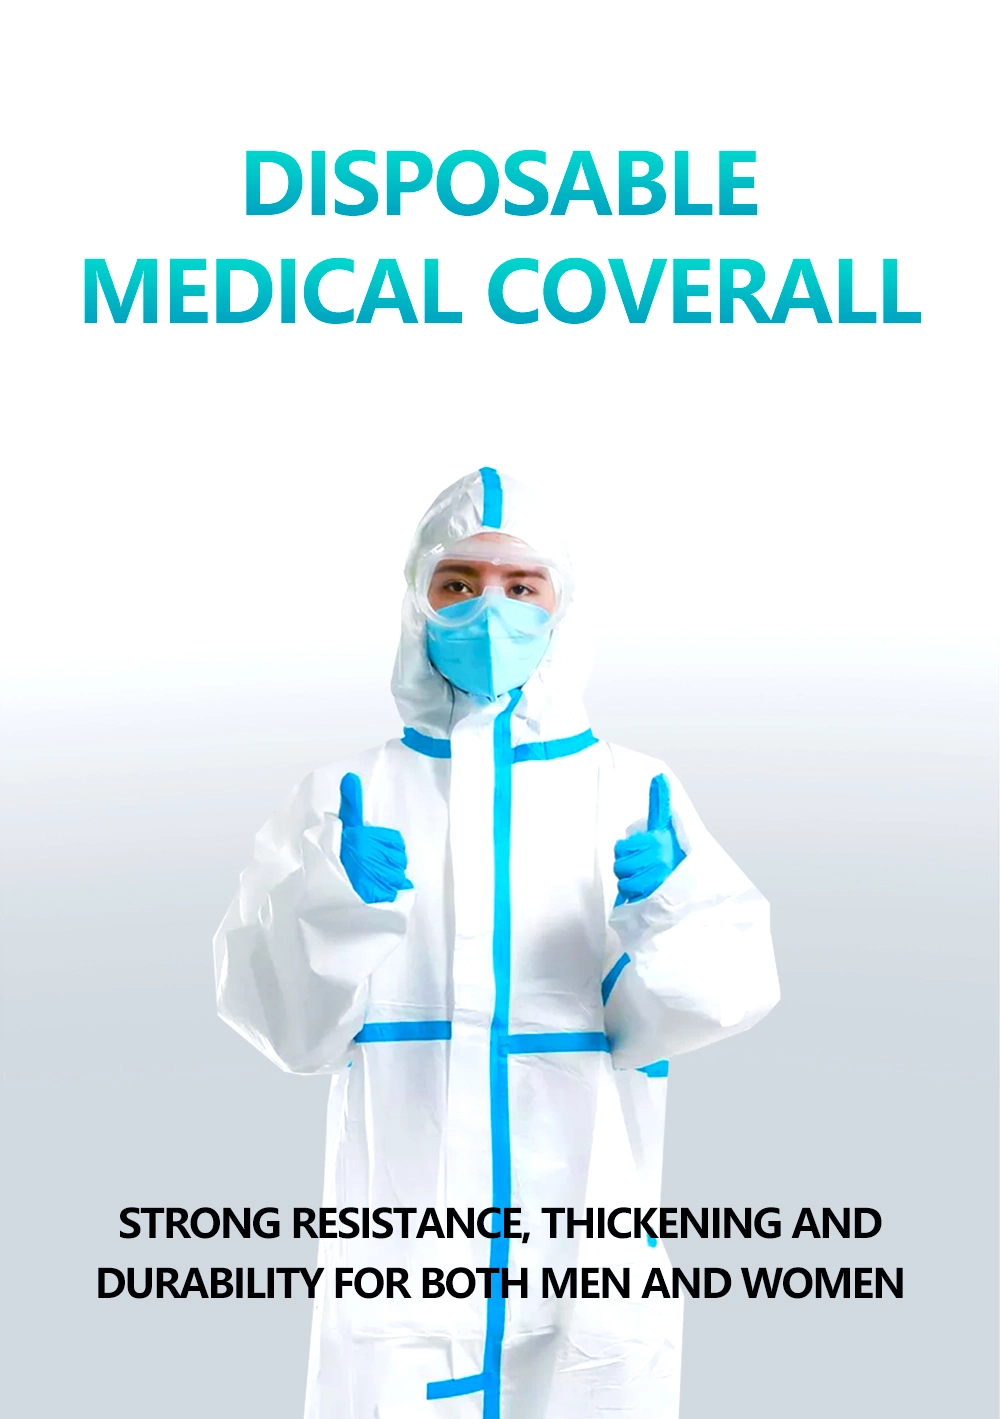 Lowest Price Lakeland Micromax Disposable Coverall Disposable Protective Coverall Type 5/6 Disposable Coveralls